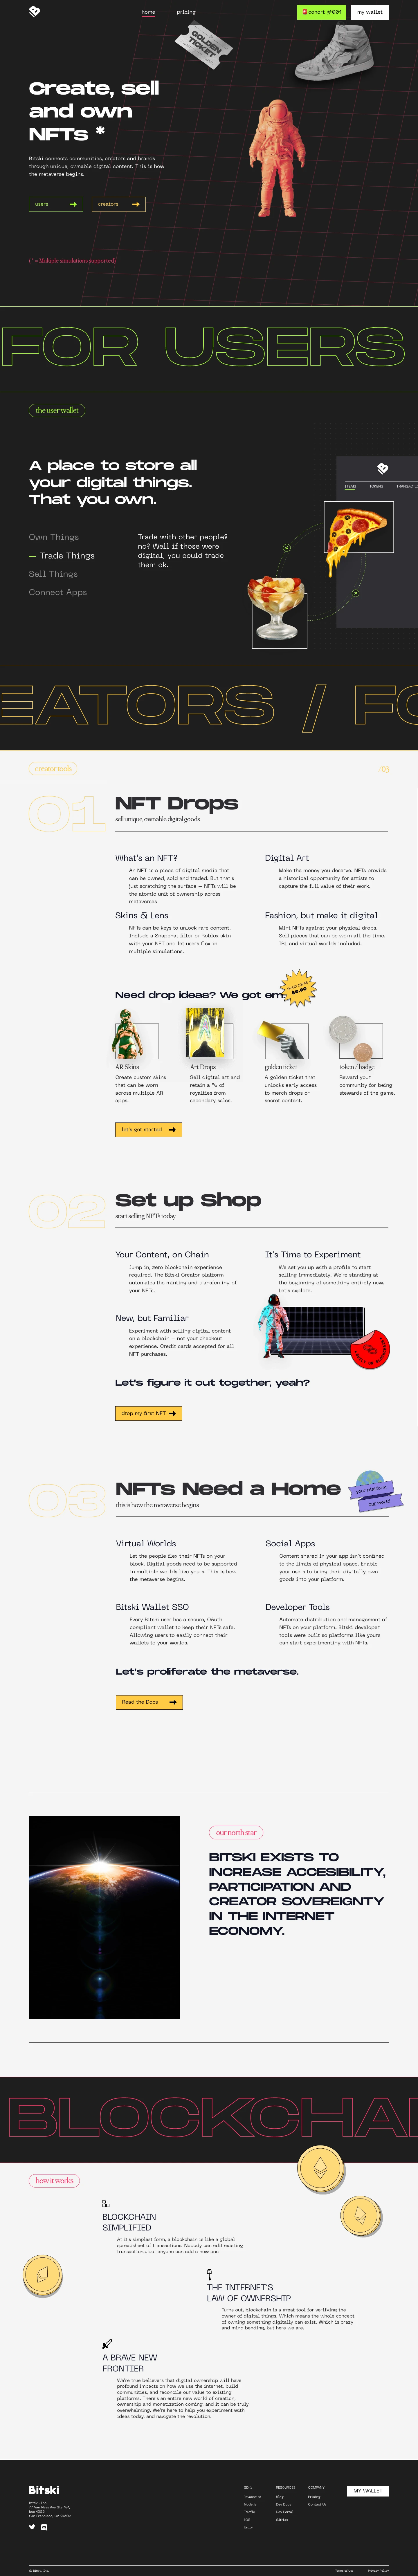 Bitski Landing Page Example: Create, sell and own NFTs. Bitski connects communities, creators and brands through unique, ownable digital content. This is how the metaverse begins.